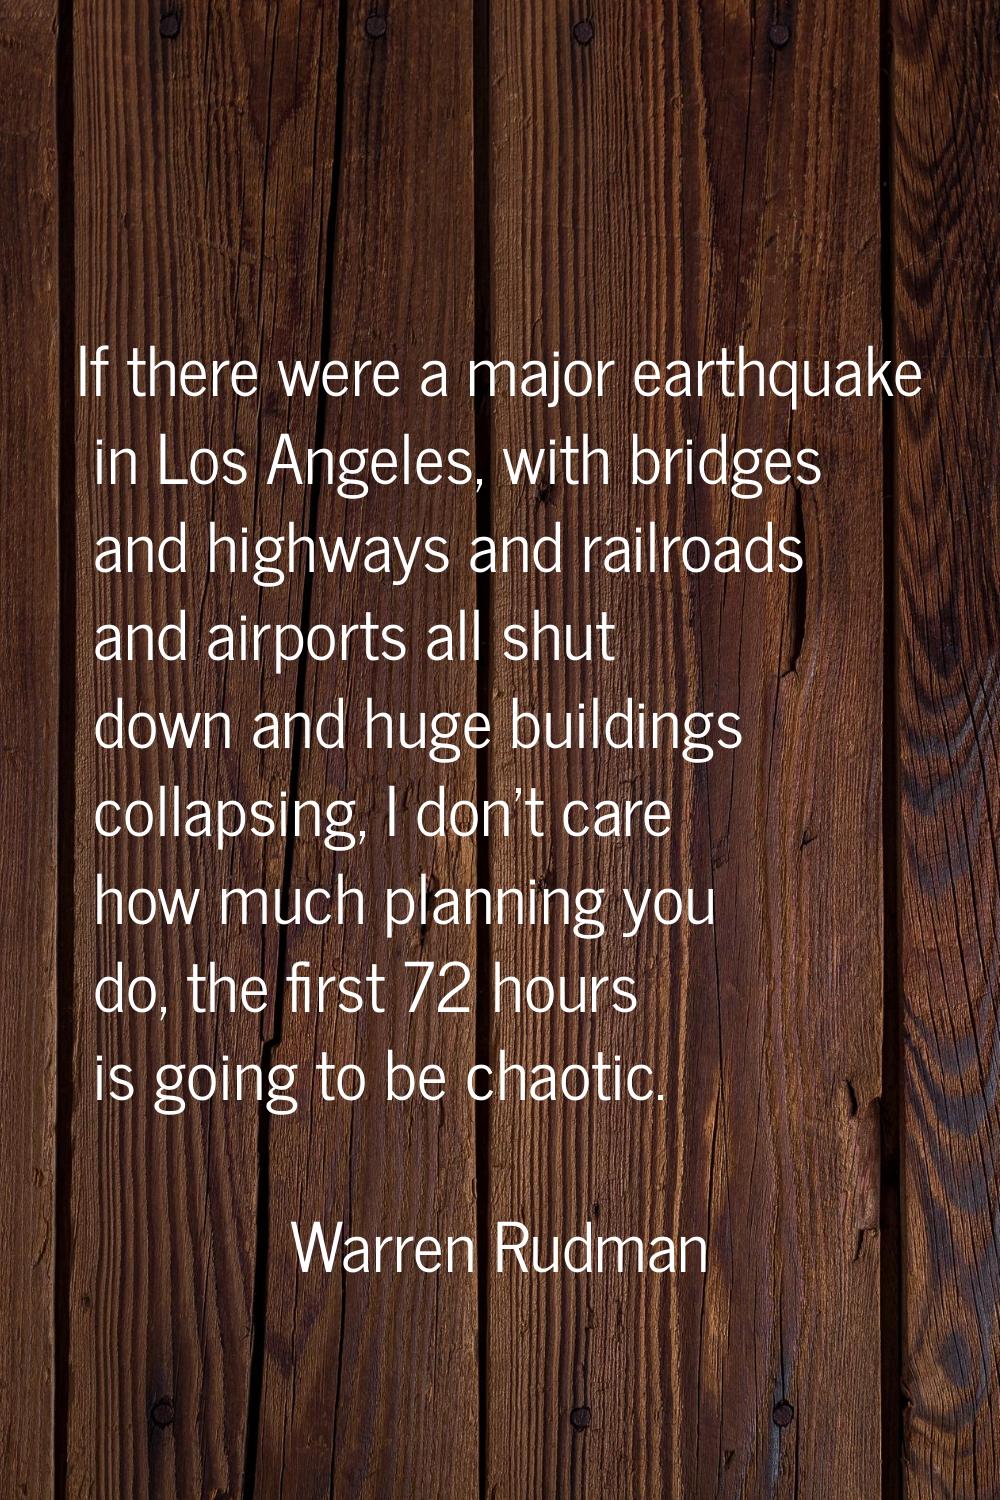 If there were a major earthquake in Los Angeles, with bridges and highways and railroads and airpor